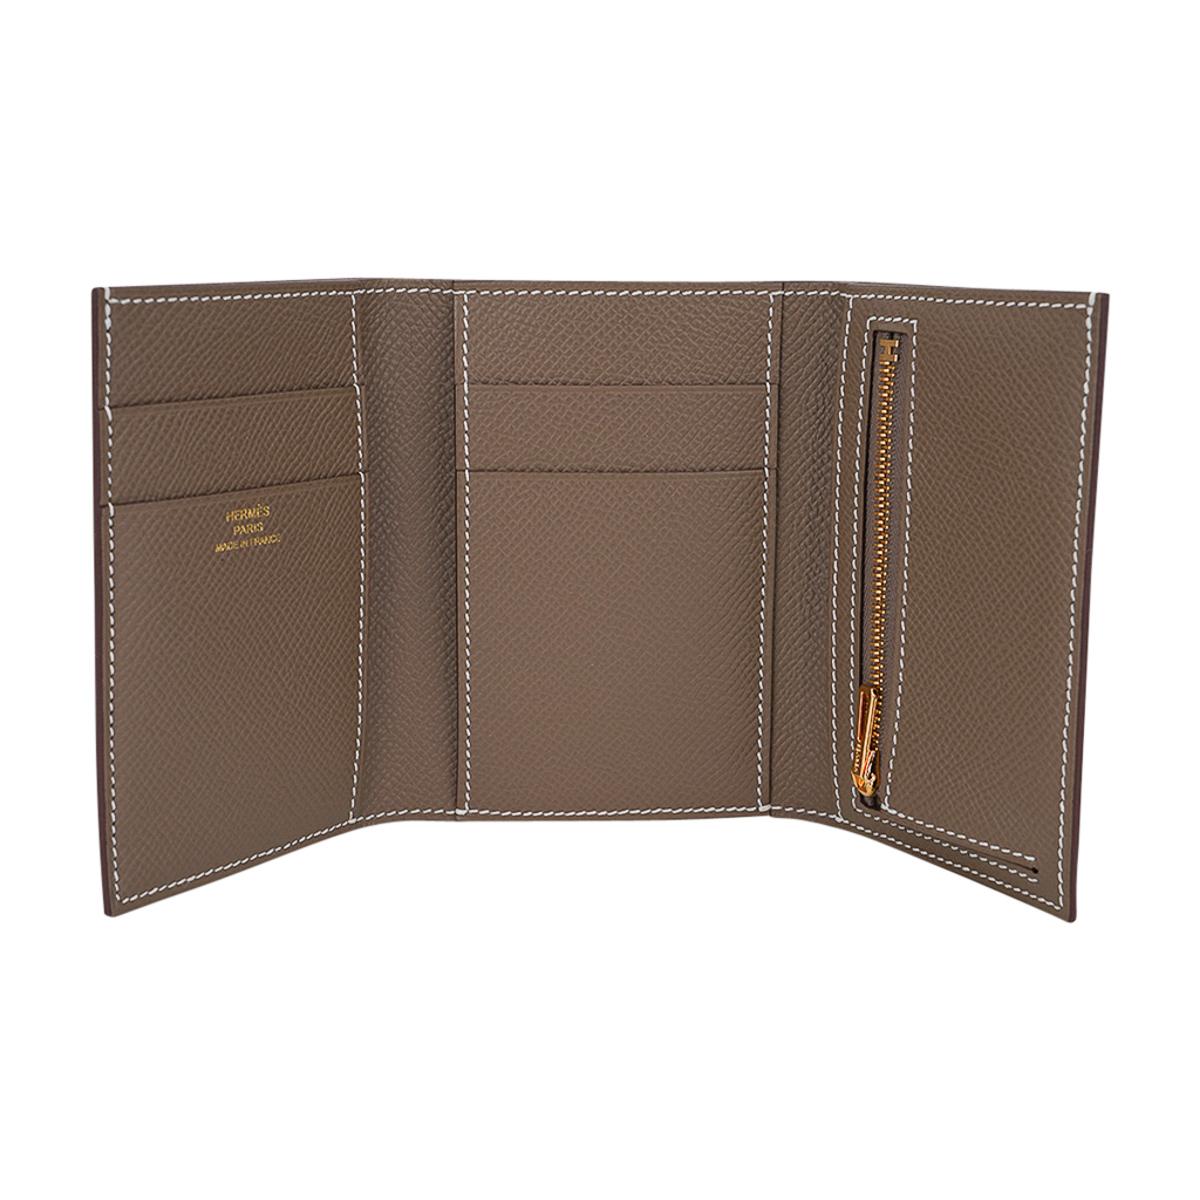 Mightychic offers an Hermes Bearn Combine Trifold Wallet featured in Etoupe.
White topstitch over Epsom leather.
Gold hardware.
The wallet has a tab flap through the iconic H for closure.
Inside the wallet opens to reveal 1 pocket for bills, 4 slot